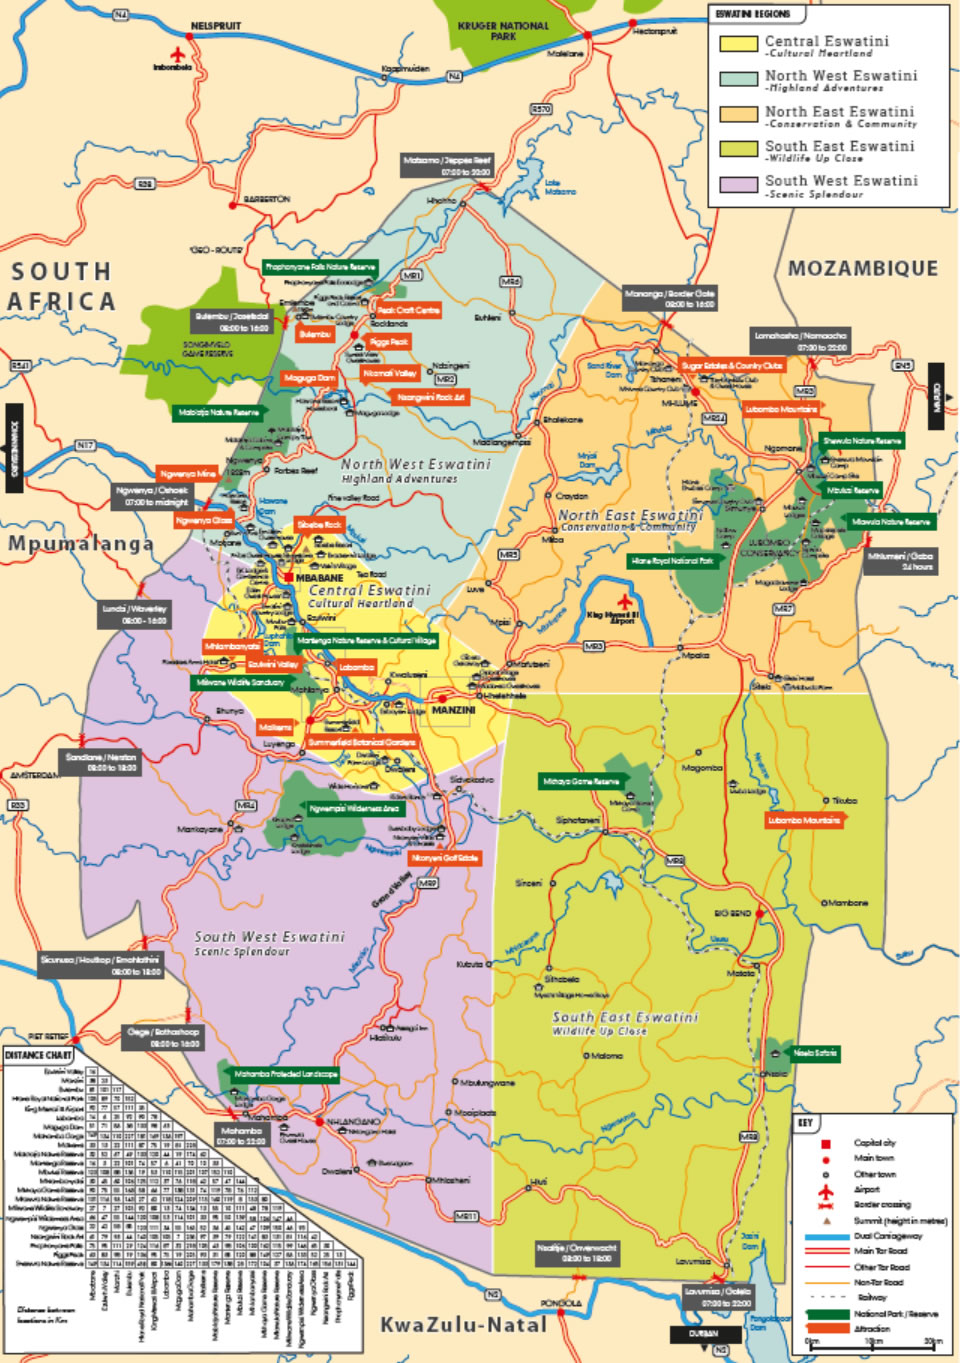 map of eSwatini sourced from Eswatini Tourism Authority